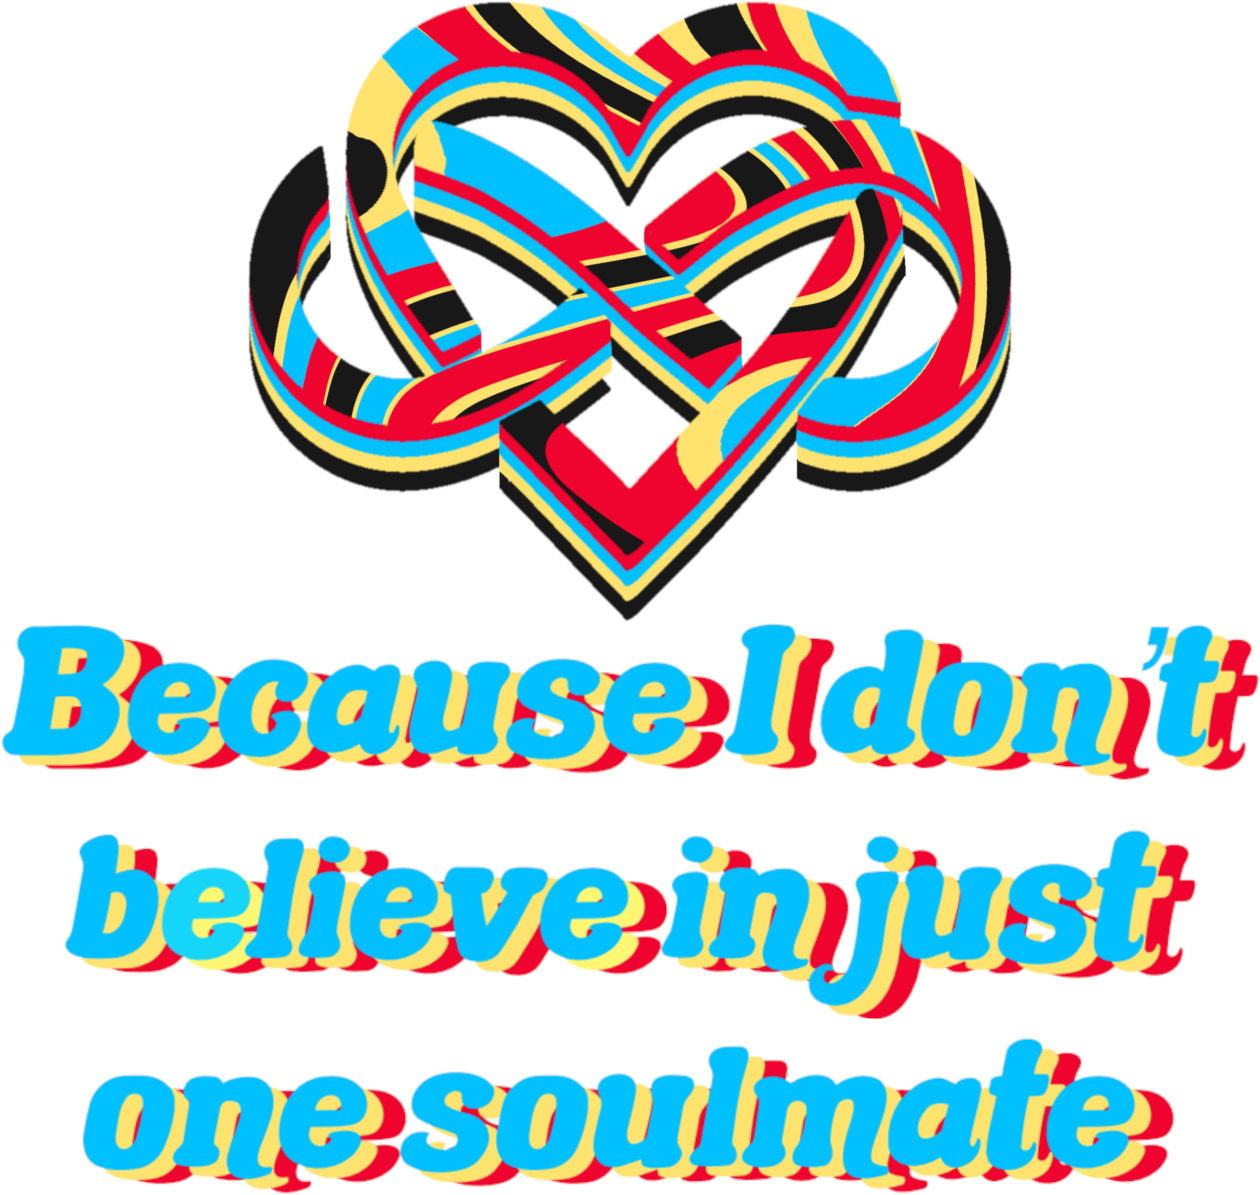 Because I Don't Believe in Just One Soulmate